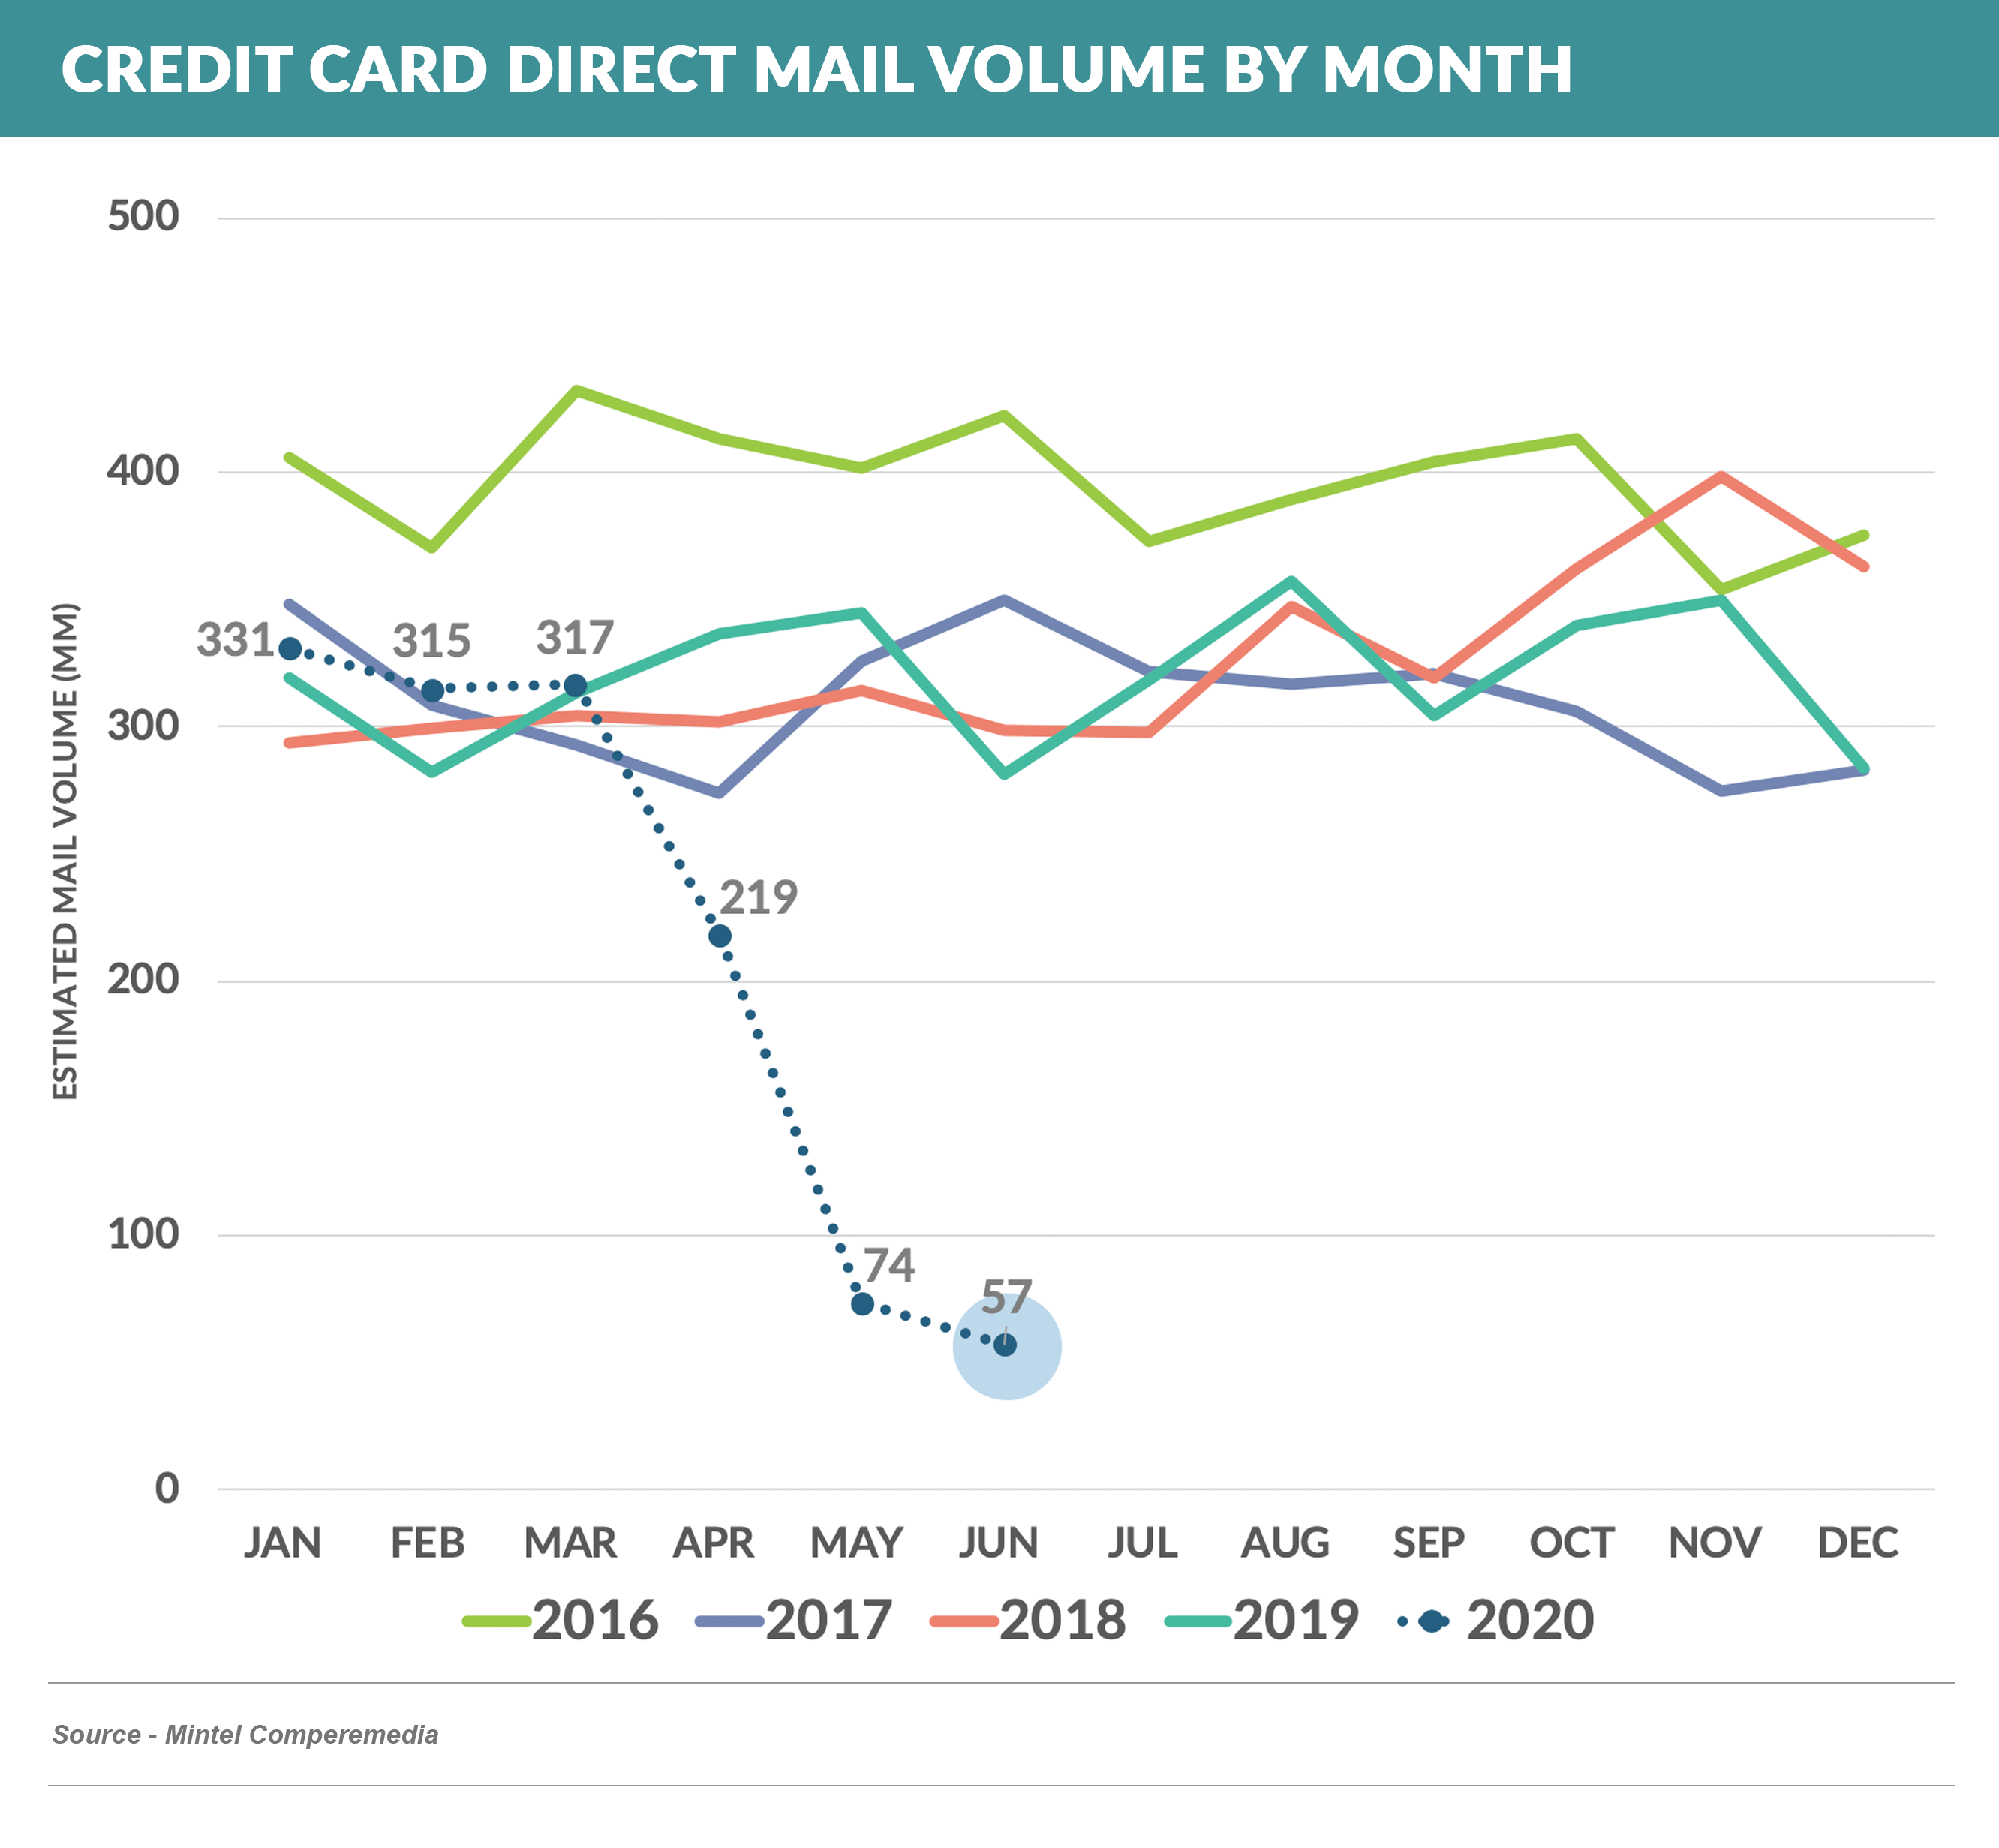 Credit Card Direct Mail Volume By Month 20200725 (1)